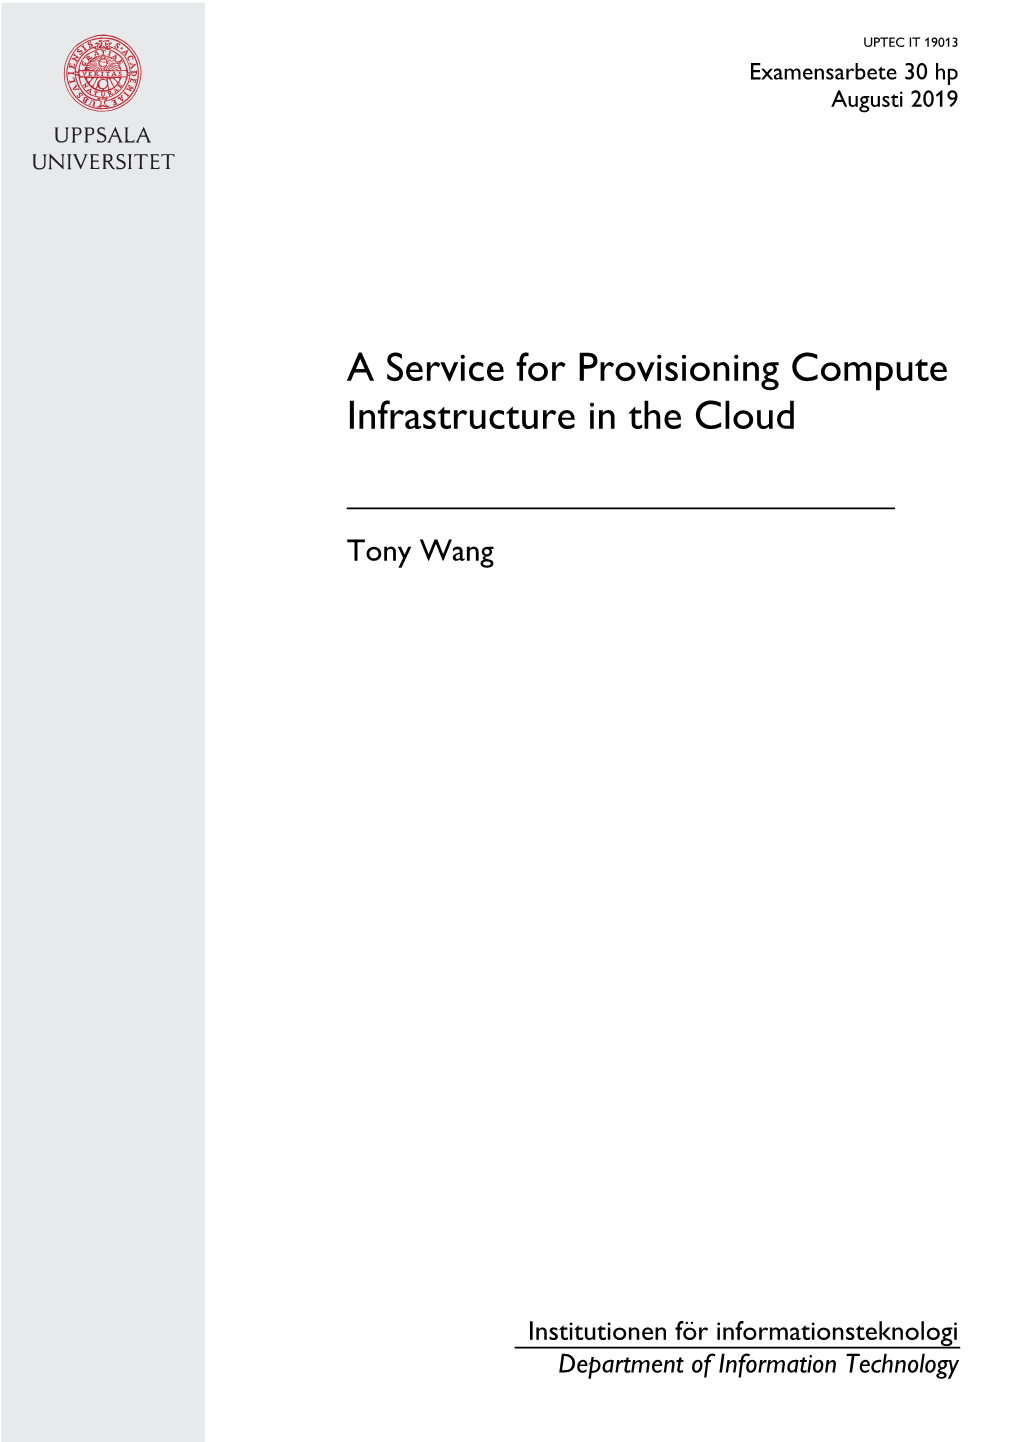 A Service for Provisioning Compute Infrastructure in the Cloud